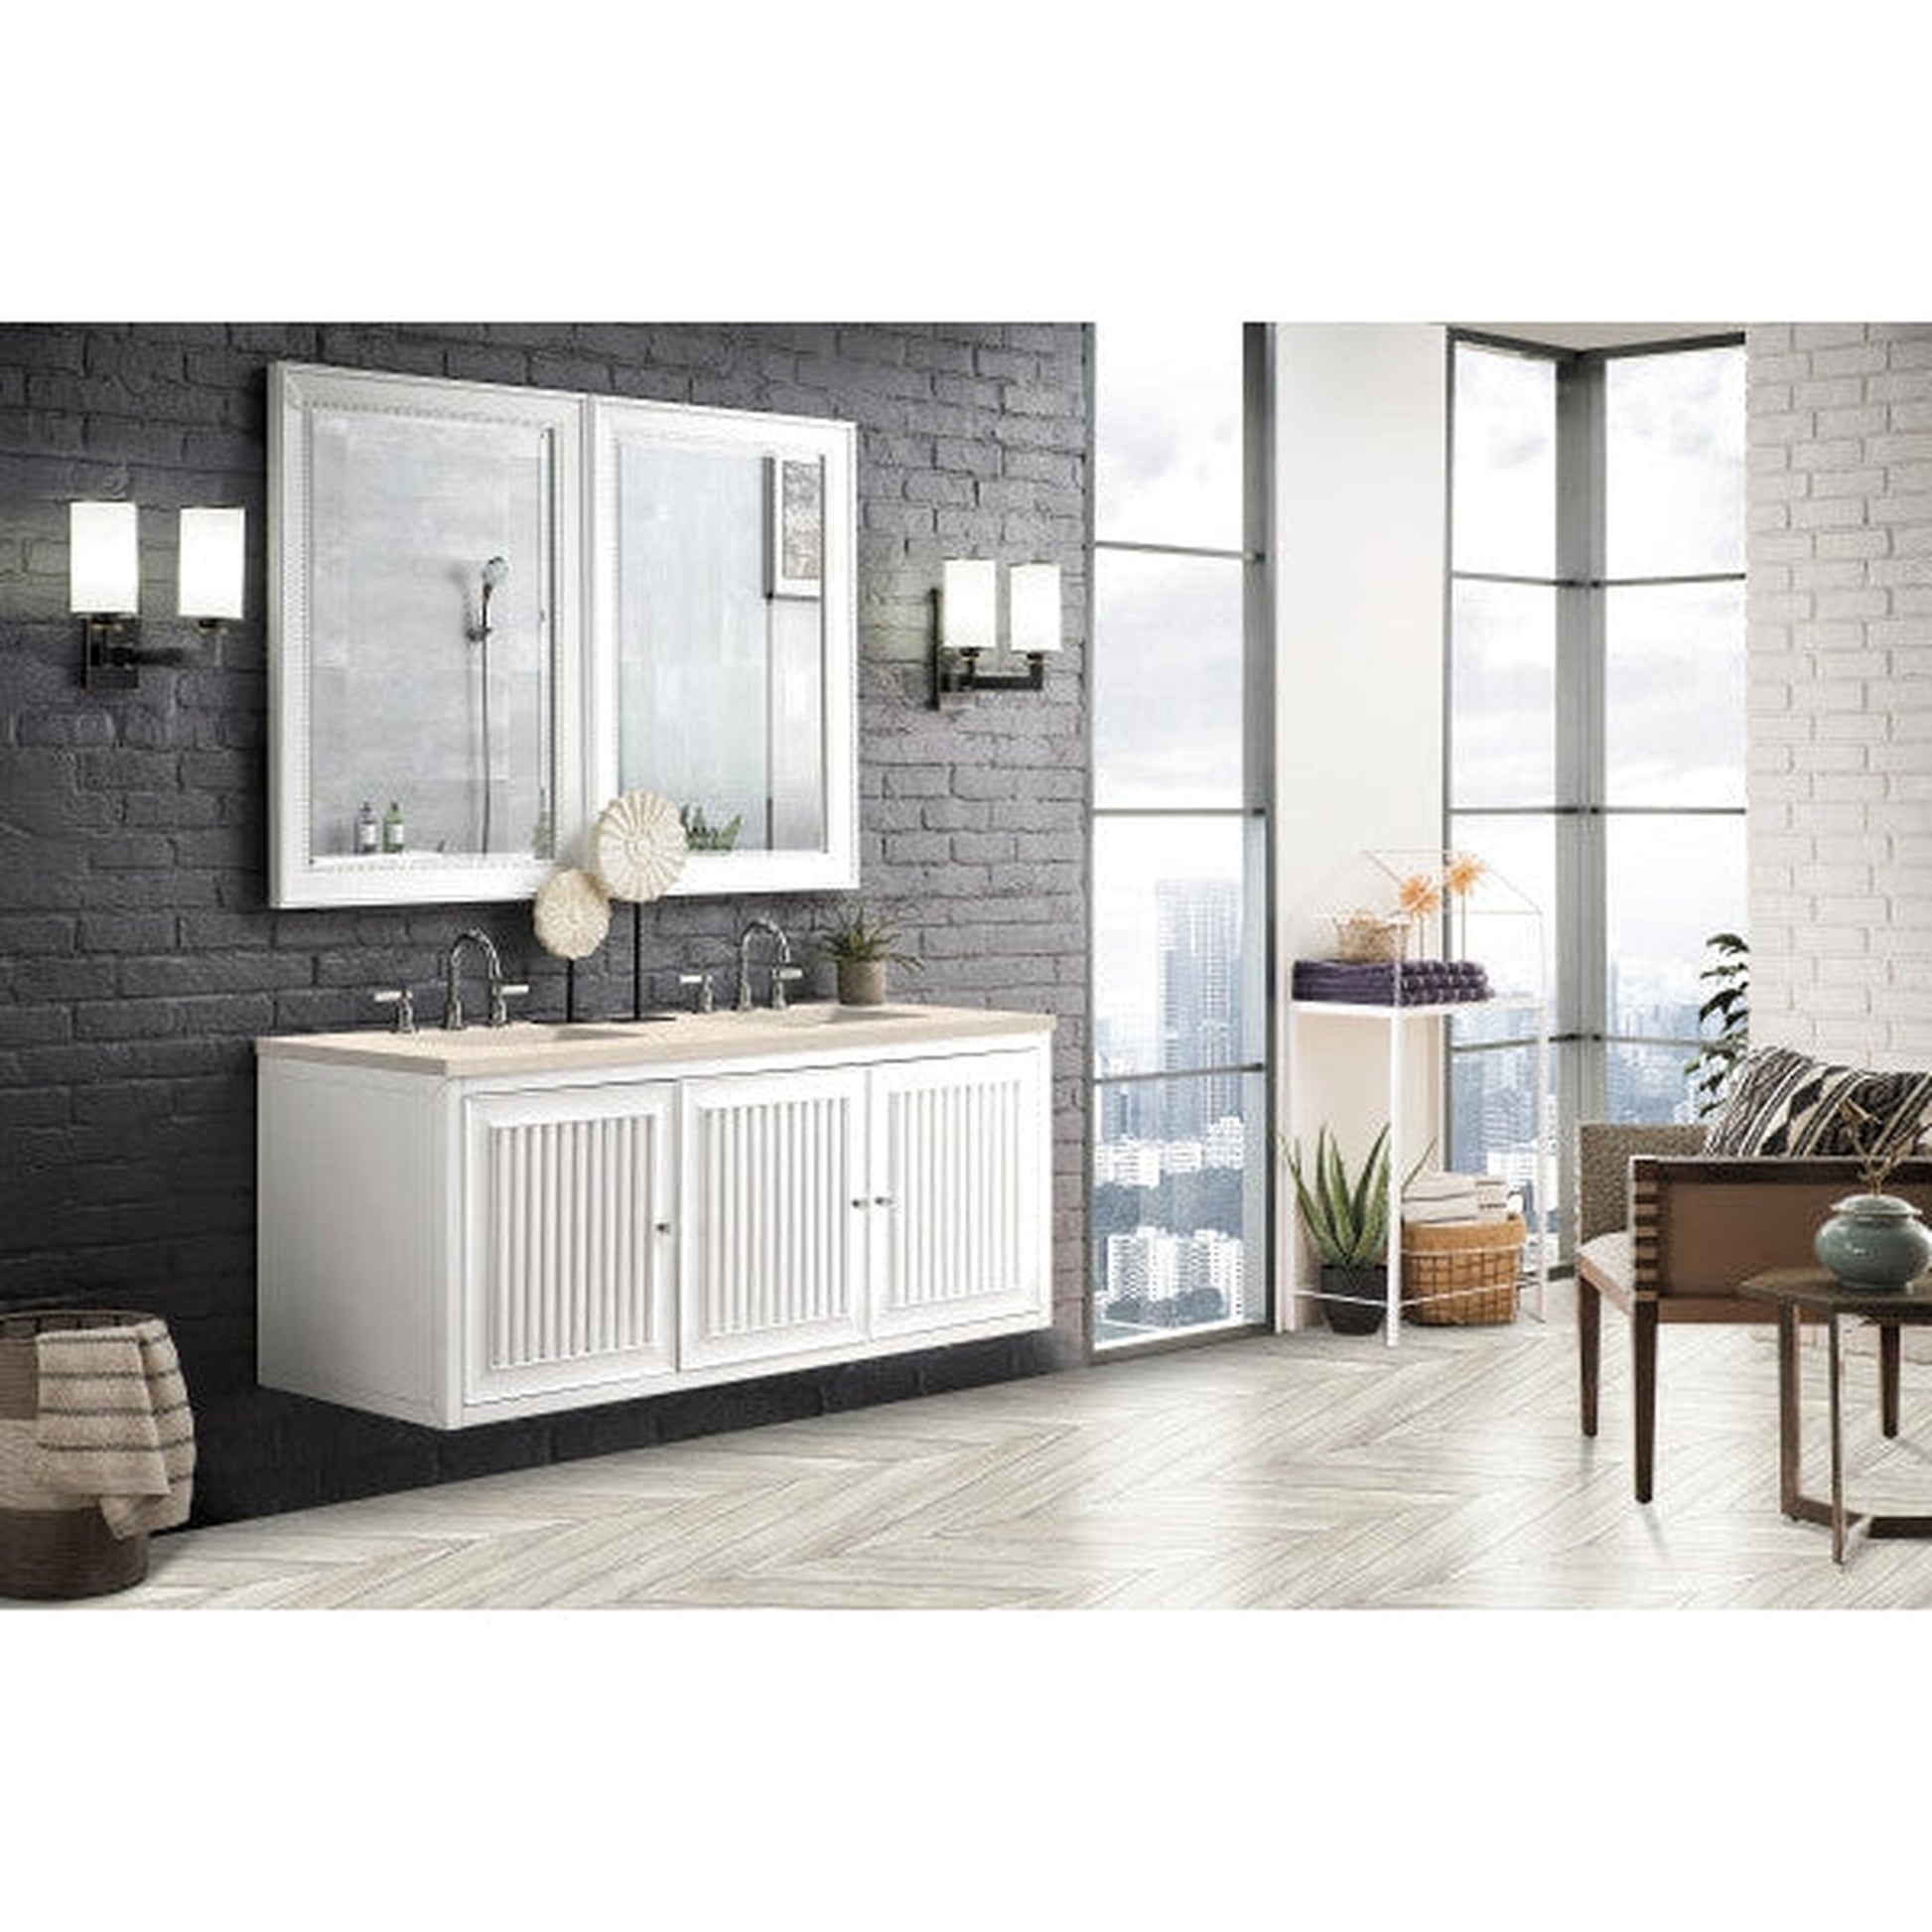 James Martin Athens 60" Double Glossy White Bathroom Vanity With 1" Eternal Marfil Quartz Top and Rectangular Ceramic Sink